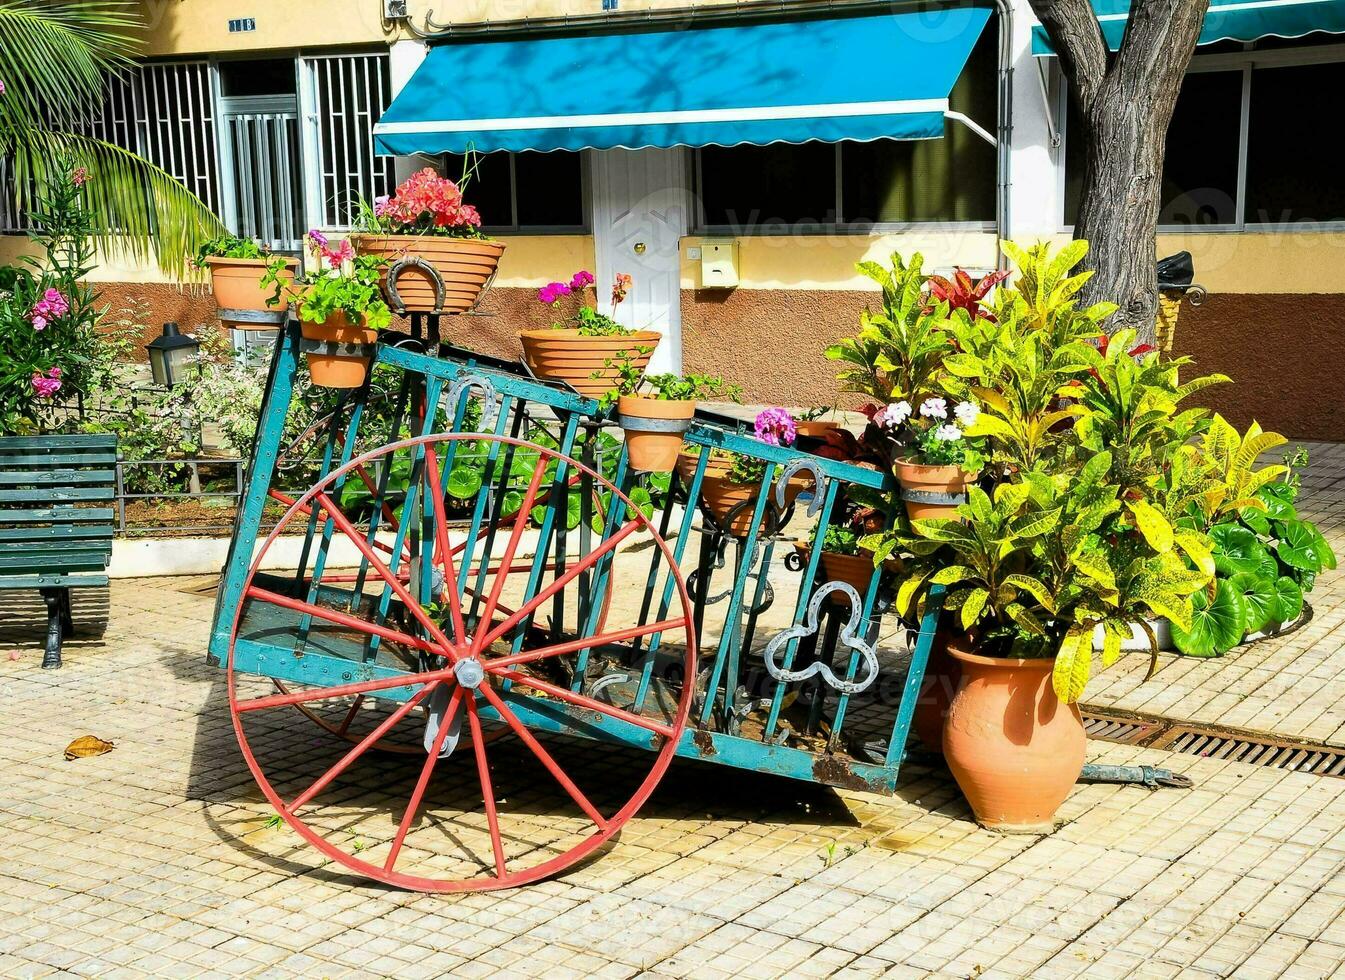 a cart with potted plants on it sitting on a brick sidewalk photo